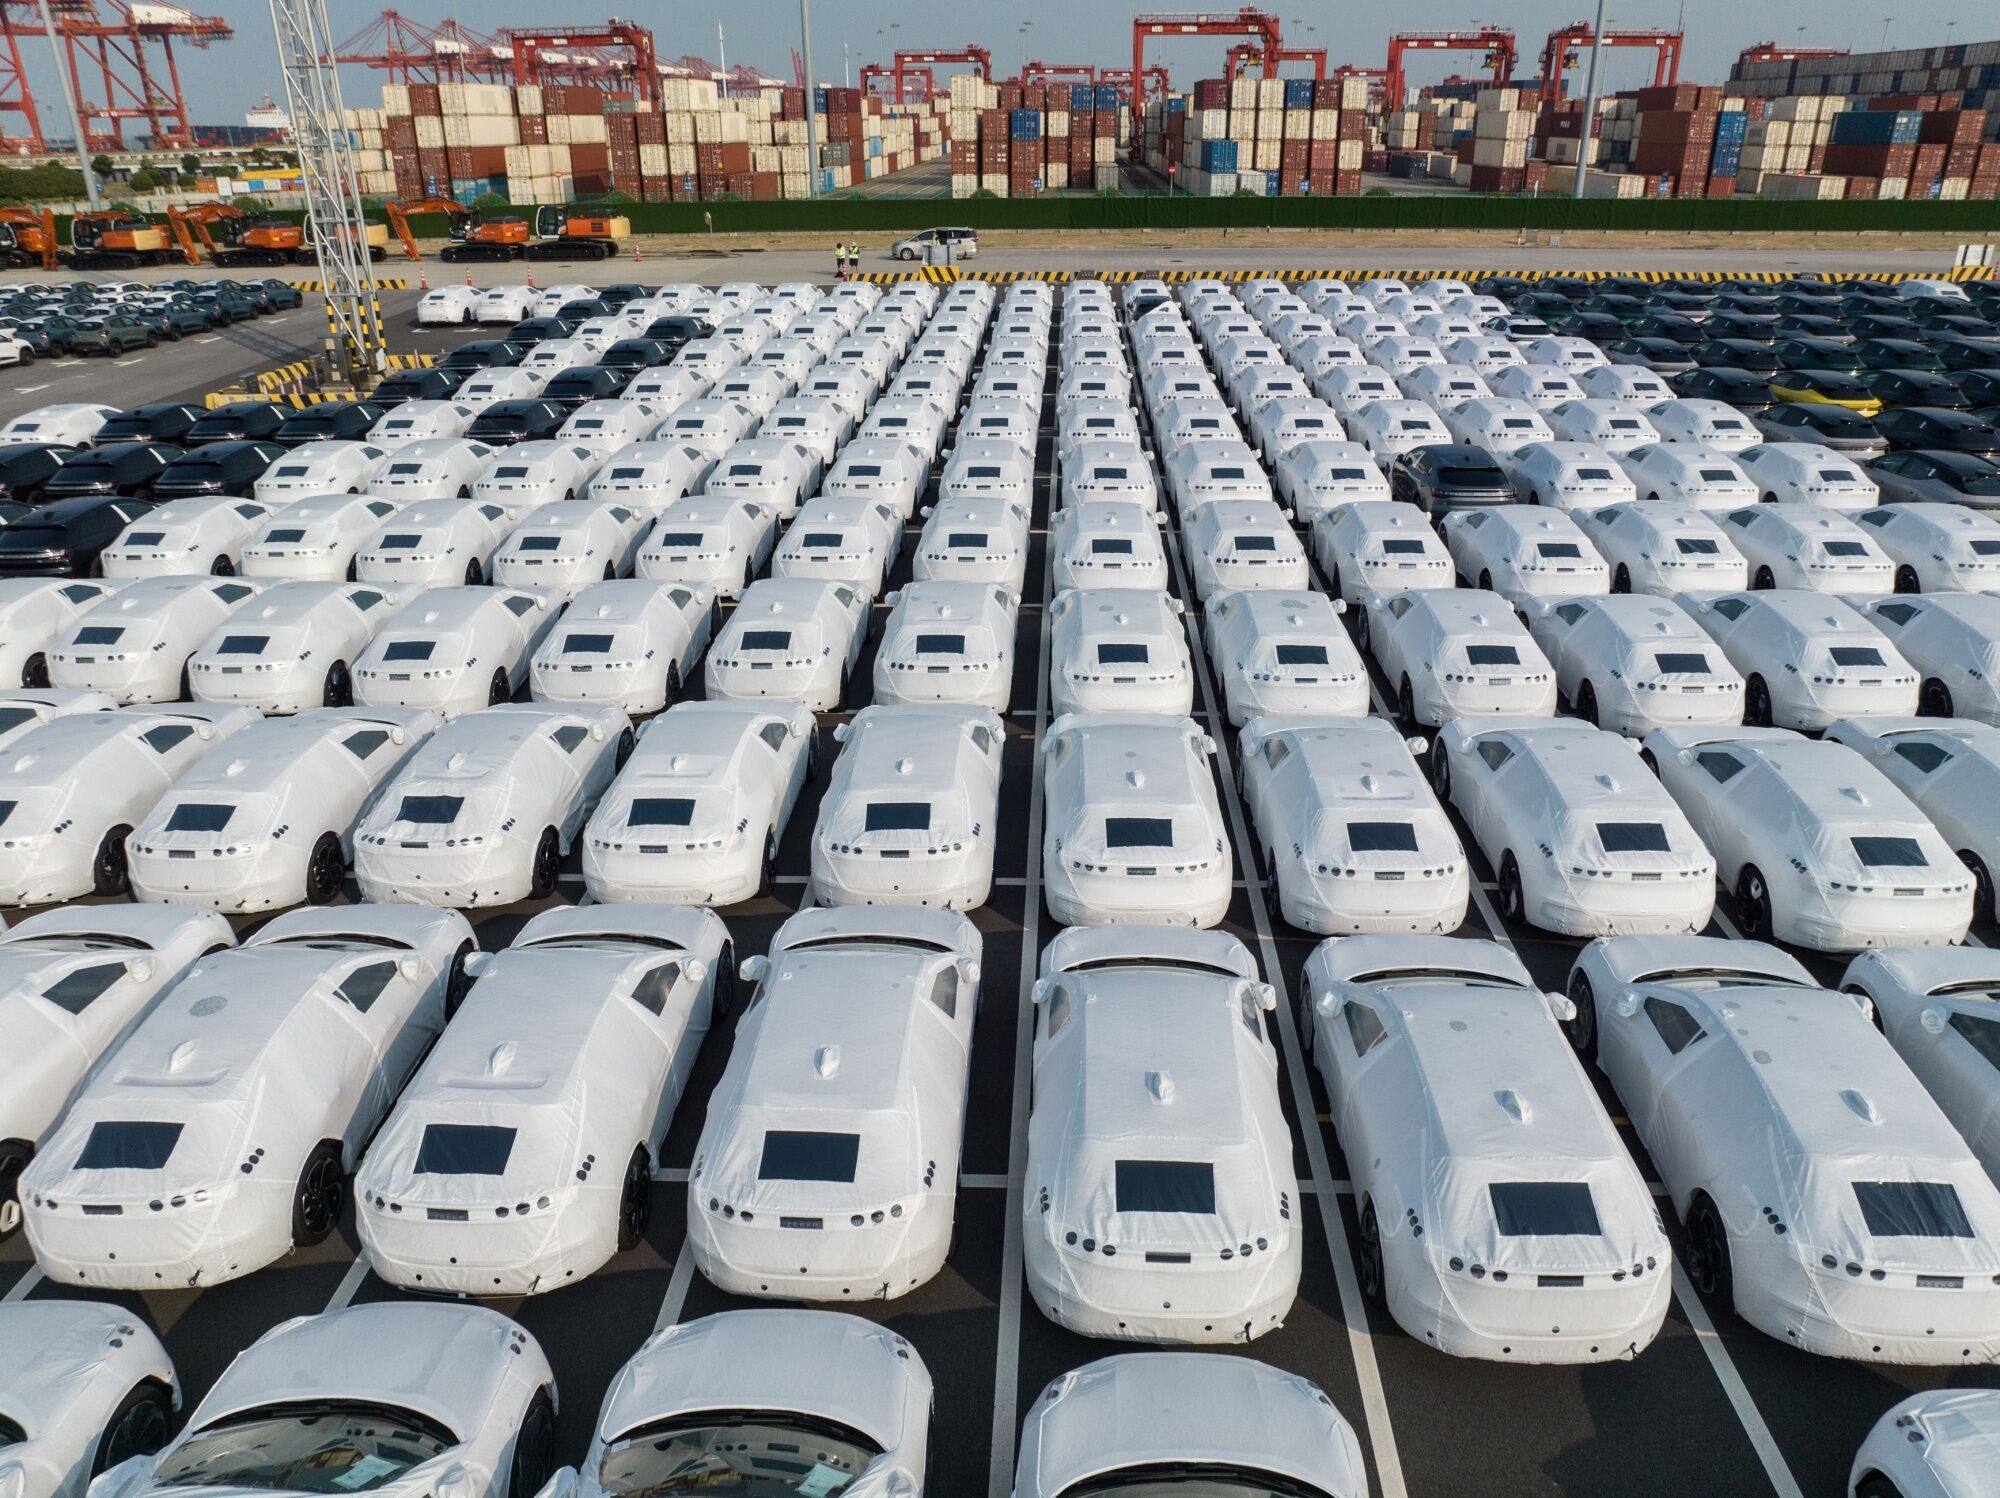 Geely Auto’s Zeekr electric vehicles ready for shipment to Europe are seen at Taicang port in Jiangsu province, on August 24. Chinese vehicles account for 8 per cent of Europe’s EV market, a share that is growing fast. Photo: Bloomberg